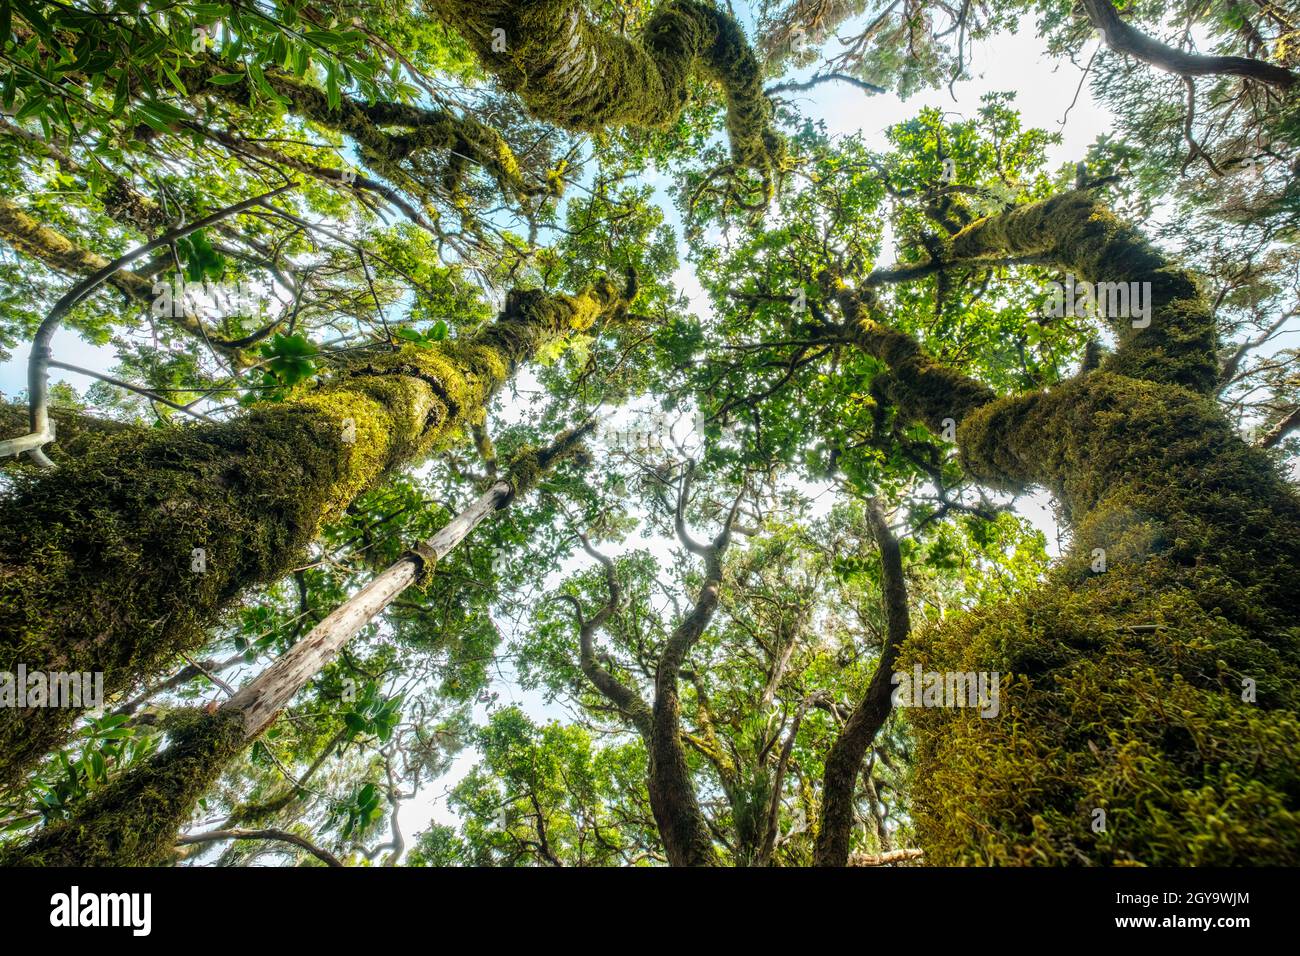 Laurel forest. Trees overgrown with moss Anaga, Tenerife Stock Photo